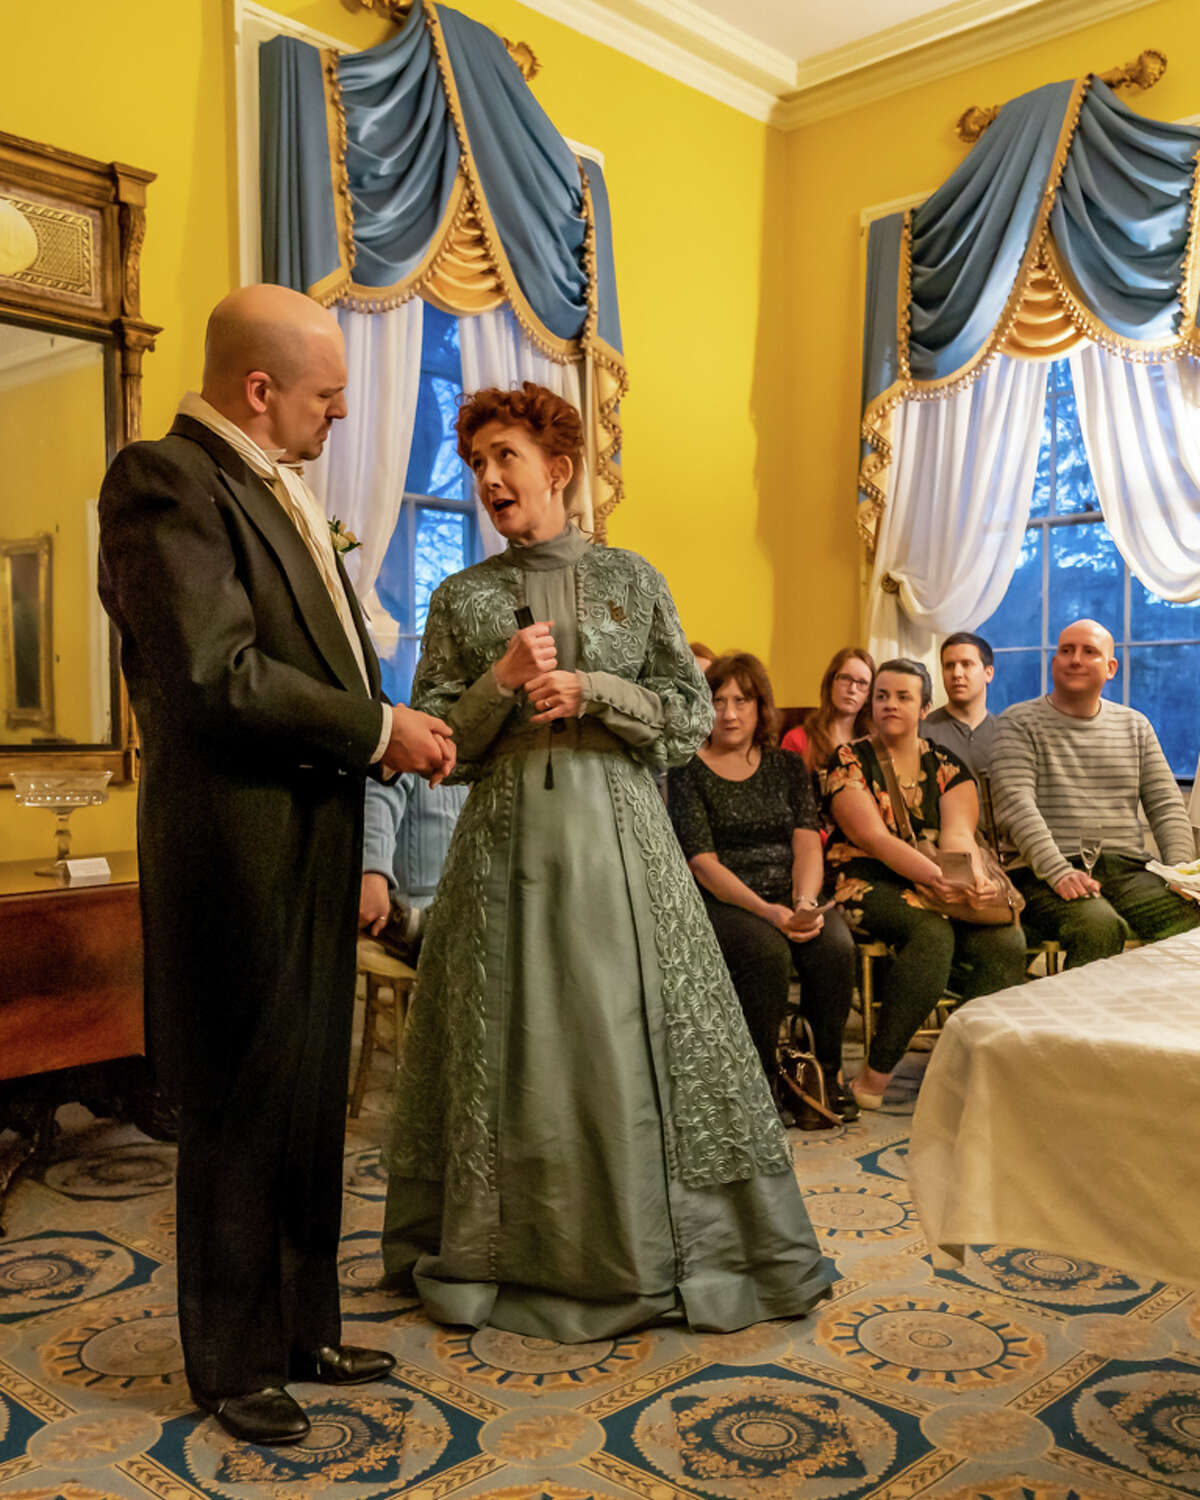 Tony Pallone, left, and Janet Hurley Kimlicko are antagonists in the NorthEast Theatre Ensemble production of Oscar Wilde's "An Ideal Husband," running through April 28, 2019, at Ten Broeck Mansion in Albany. Audience members are in the background.